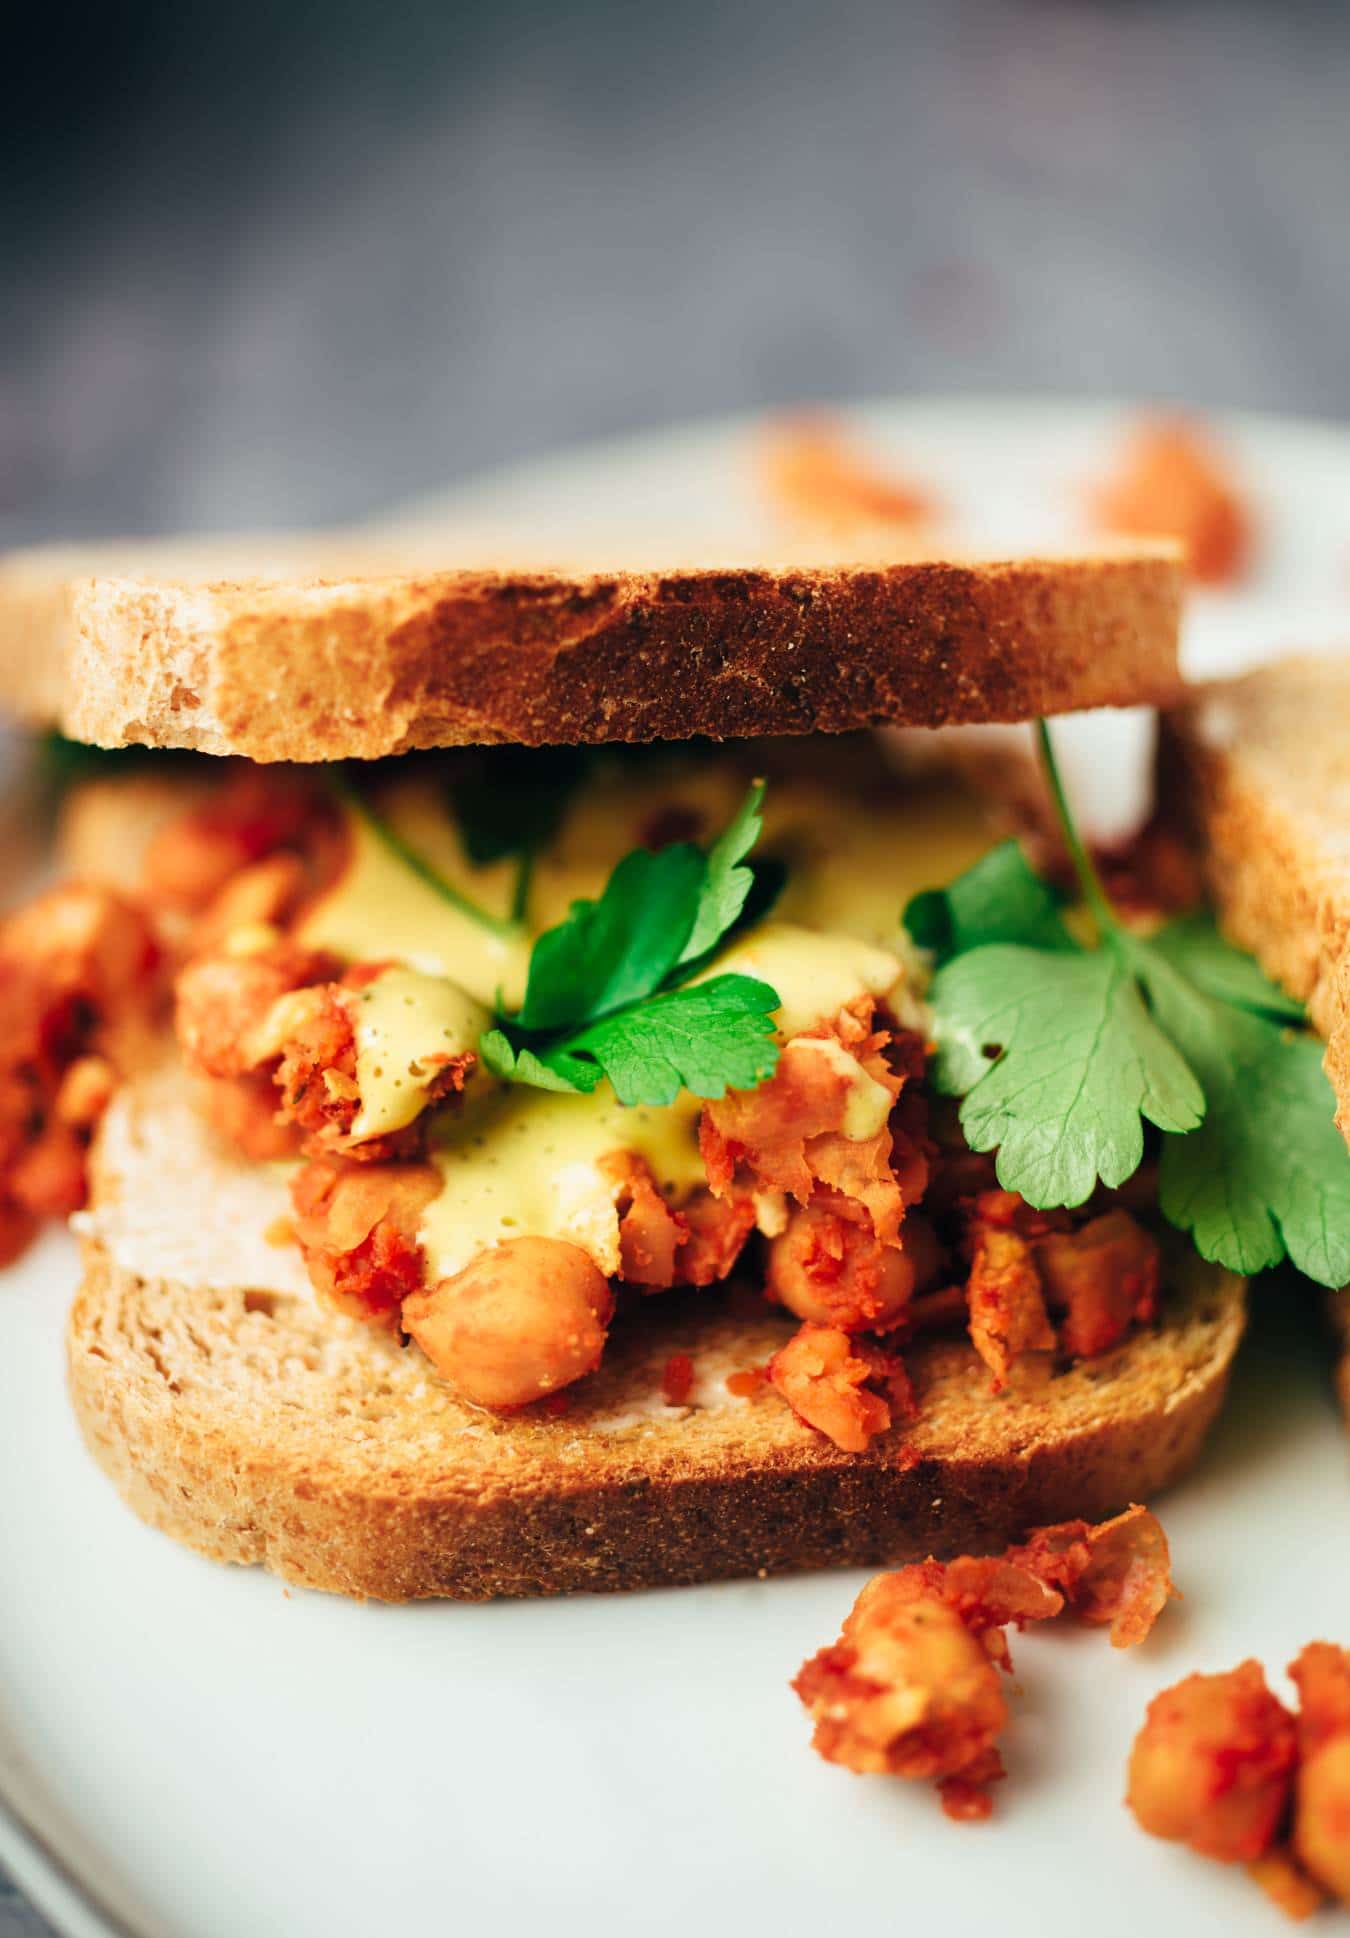 quick chickpea sandwich recipe in just 15 minutes